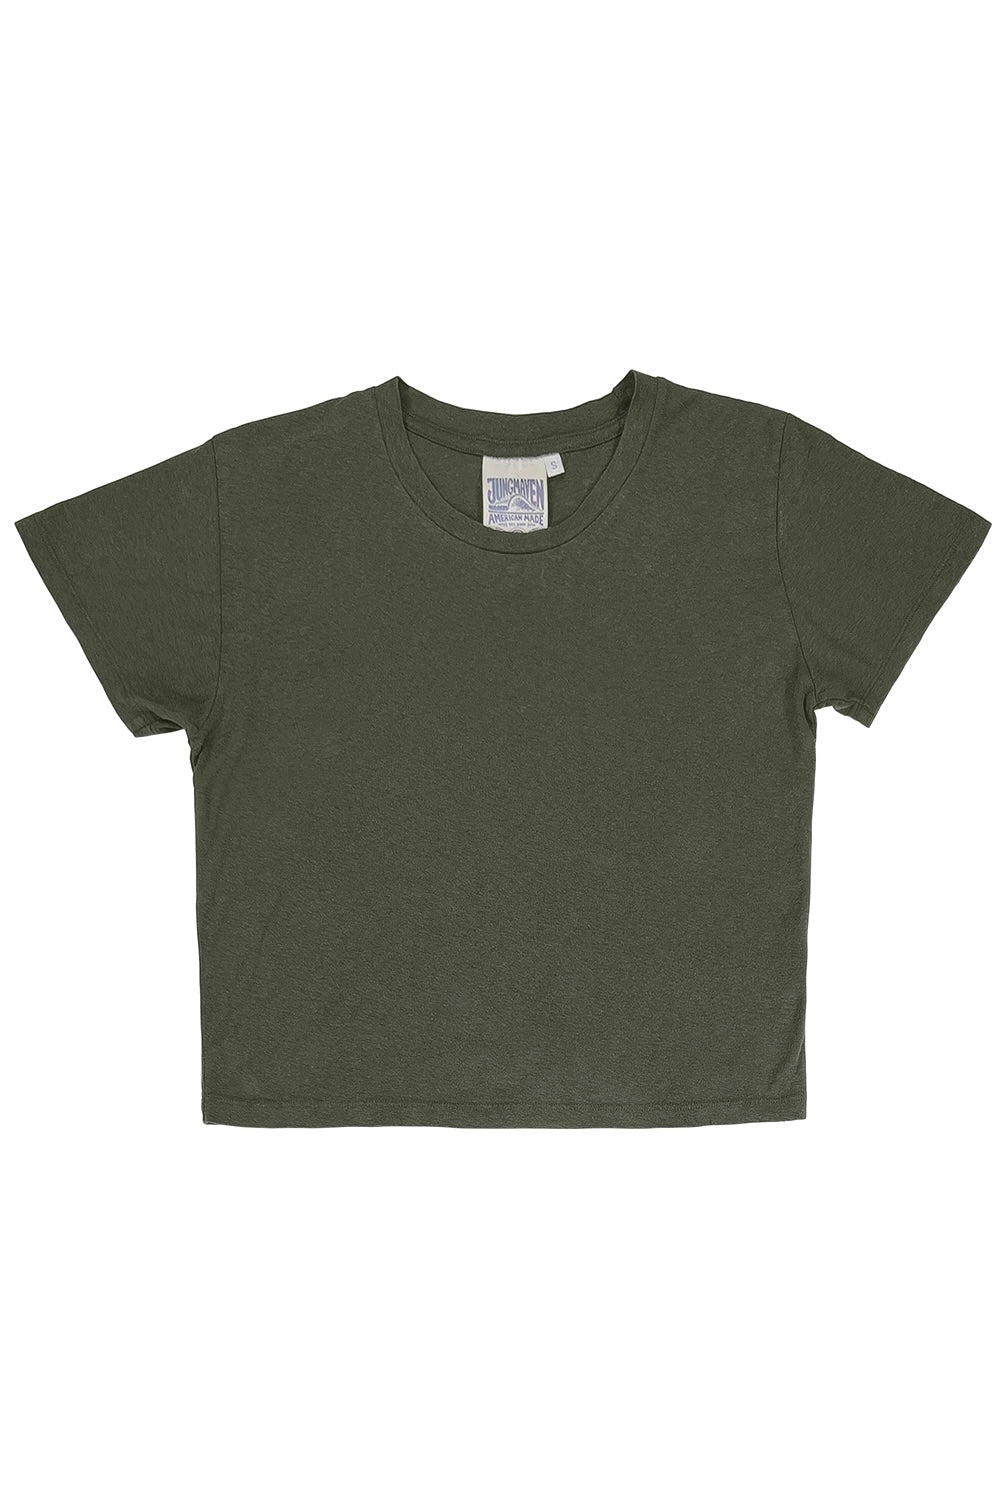 Cropped Lorel Tee | Jungmaven Hemp Clothing & Accessories / Color: Olive Green